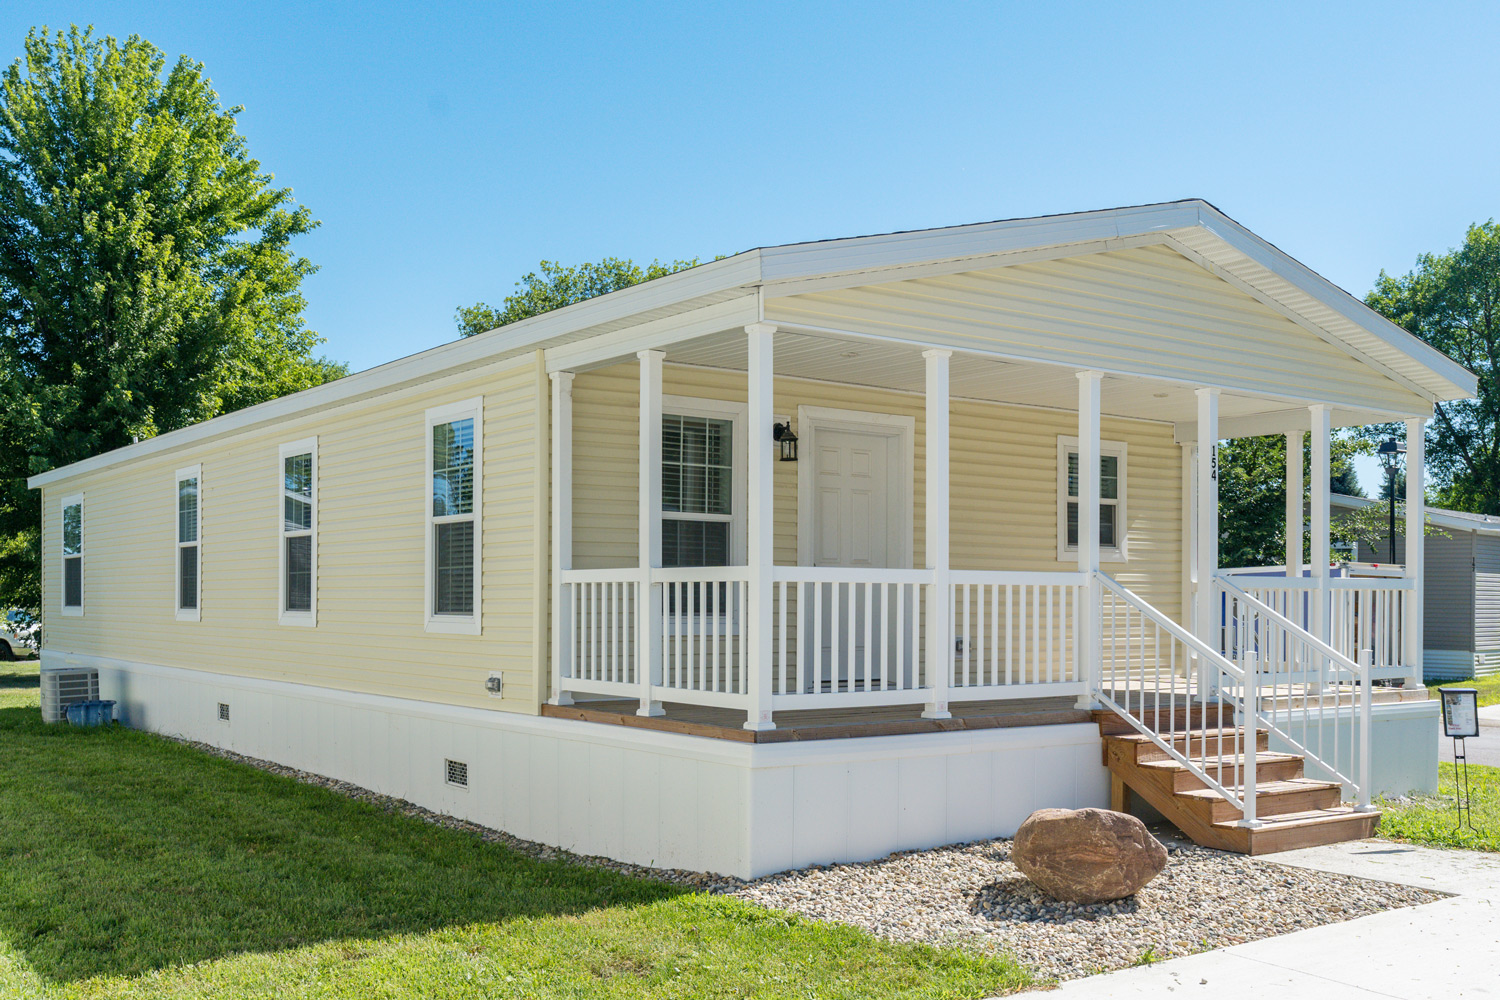 minnesota mobile homes for sale all ages community